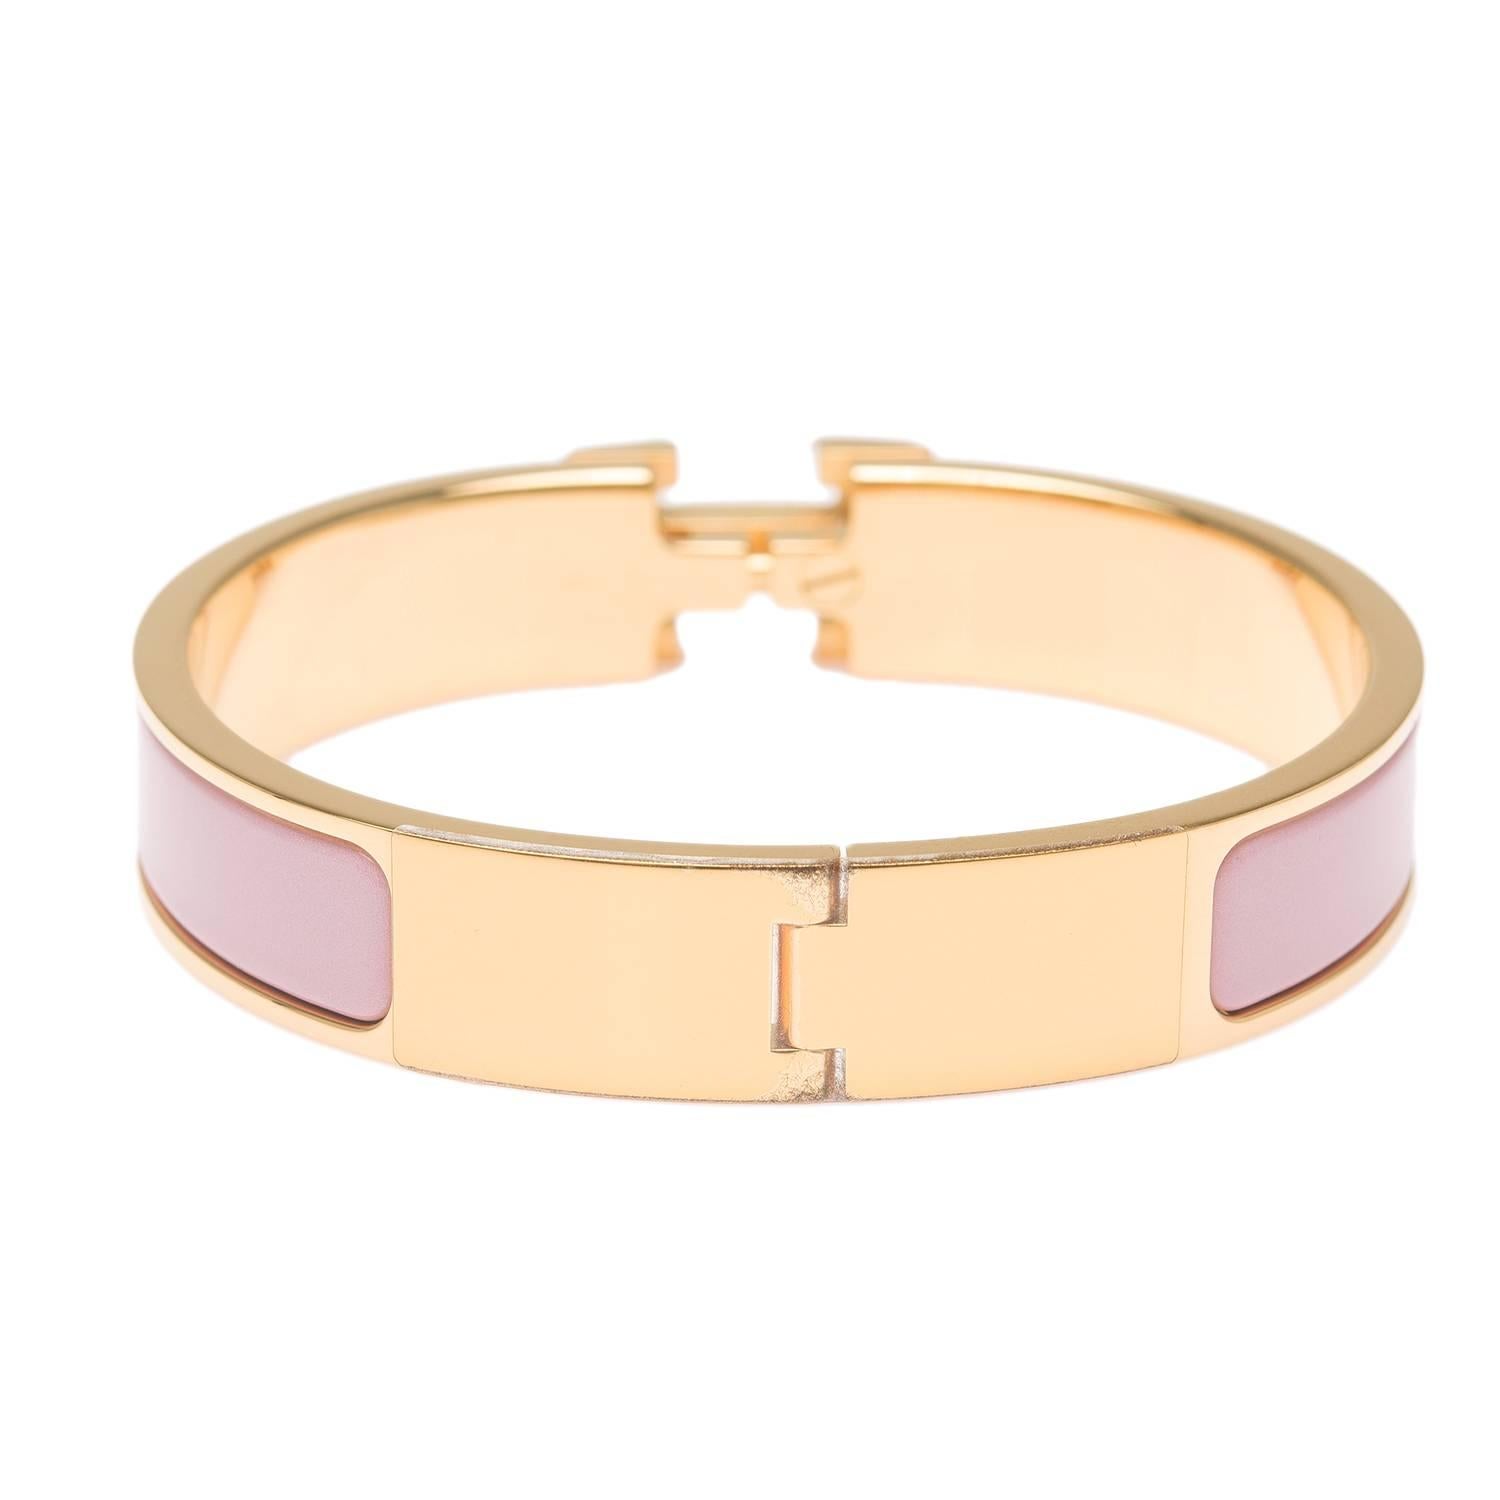 Hermes Rose Nacarat Clic Clac H Narrow Enamel Bracelet PM In New Condition For Sale In New York, NY